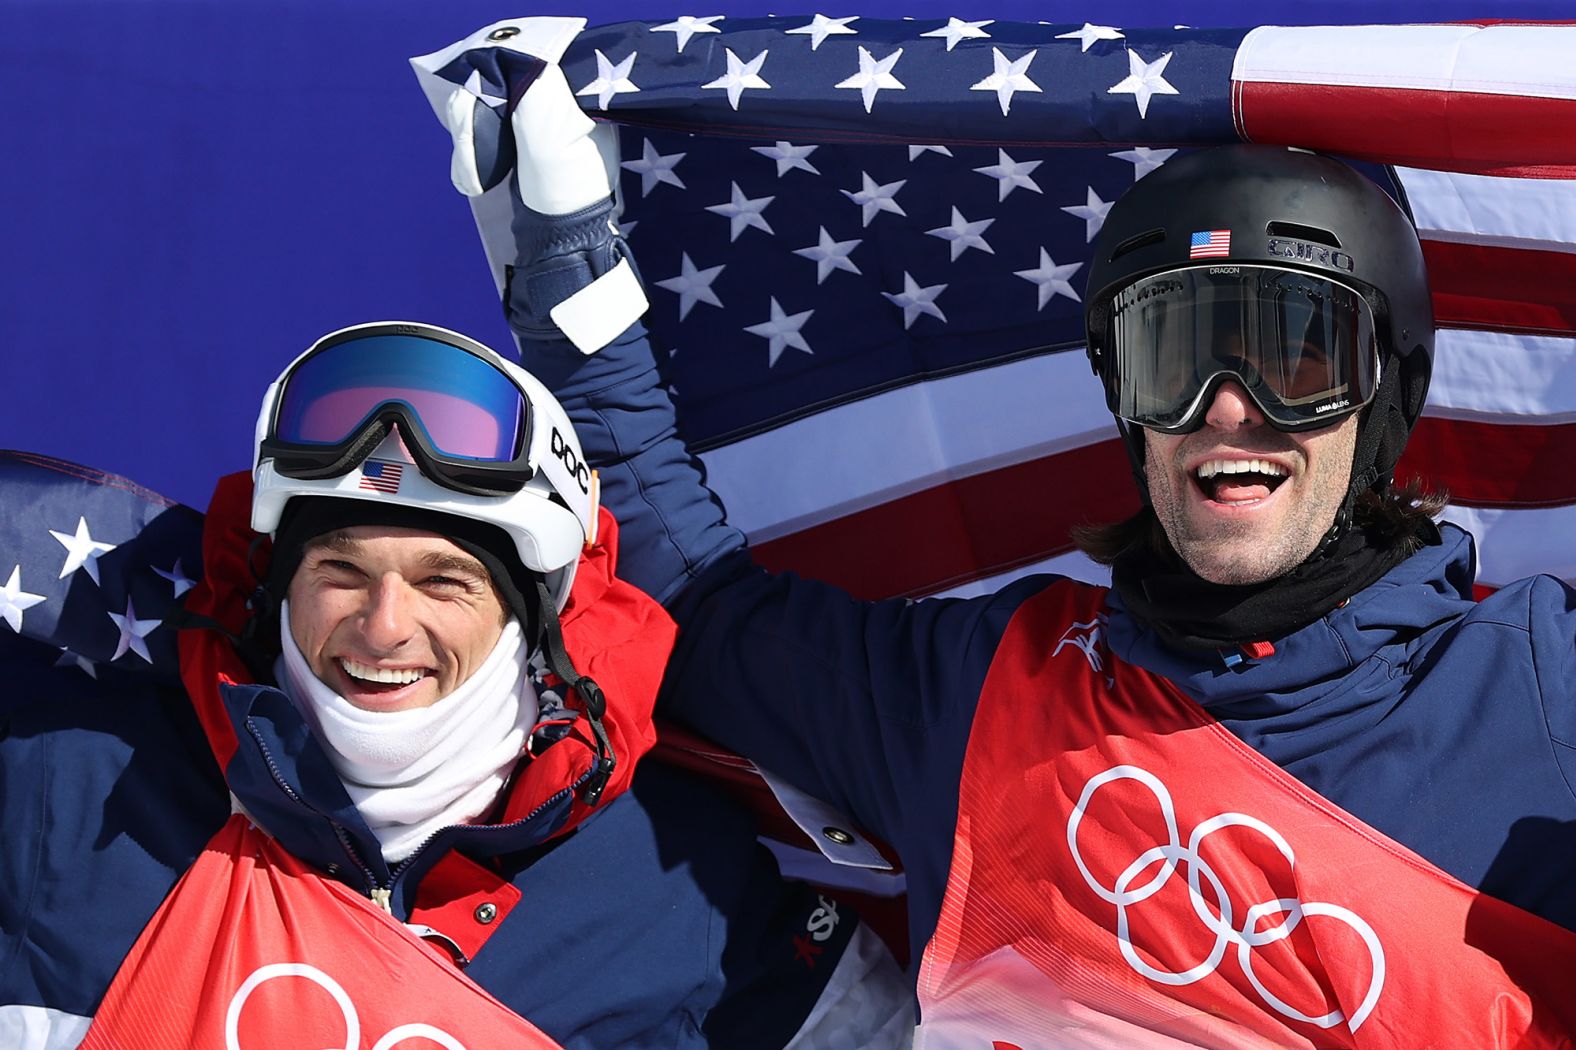 Silver medalist Nick Goepper, left, and gold medalist Alex Hall — two freestyle skiers from the United States — celebrate after <a href="index.php?page=&url=https%3A%2F%2Fwww.cnn.com%2Fworld%2Flive-news%2Fbeijing-winter-olympics-02-16-22-spt%2Fh_5d43f438cc175be17236e4427776a0b7" target="_blank">the slopestyle final</a> on February 16. Hall's gold was the first of his career, while it was Goepper's second straight silver in the event. 